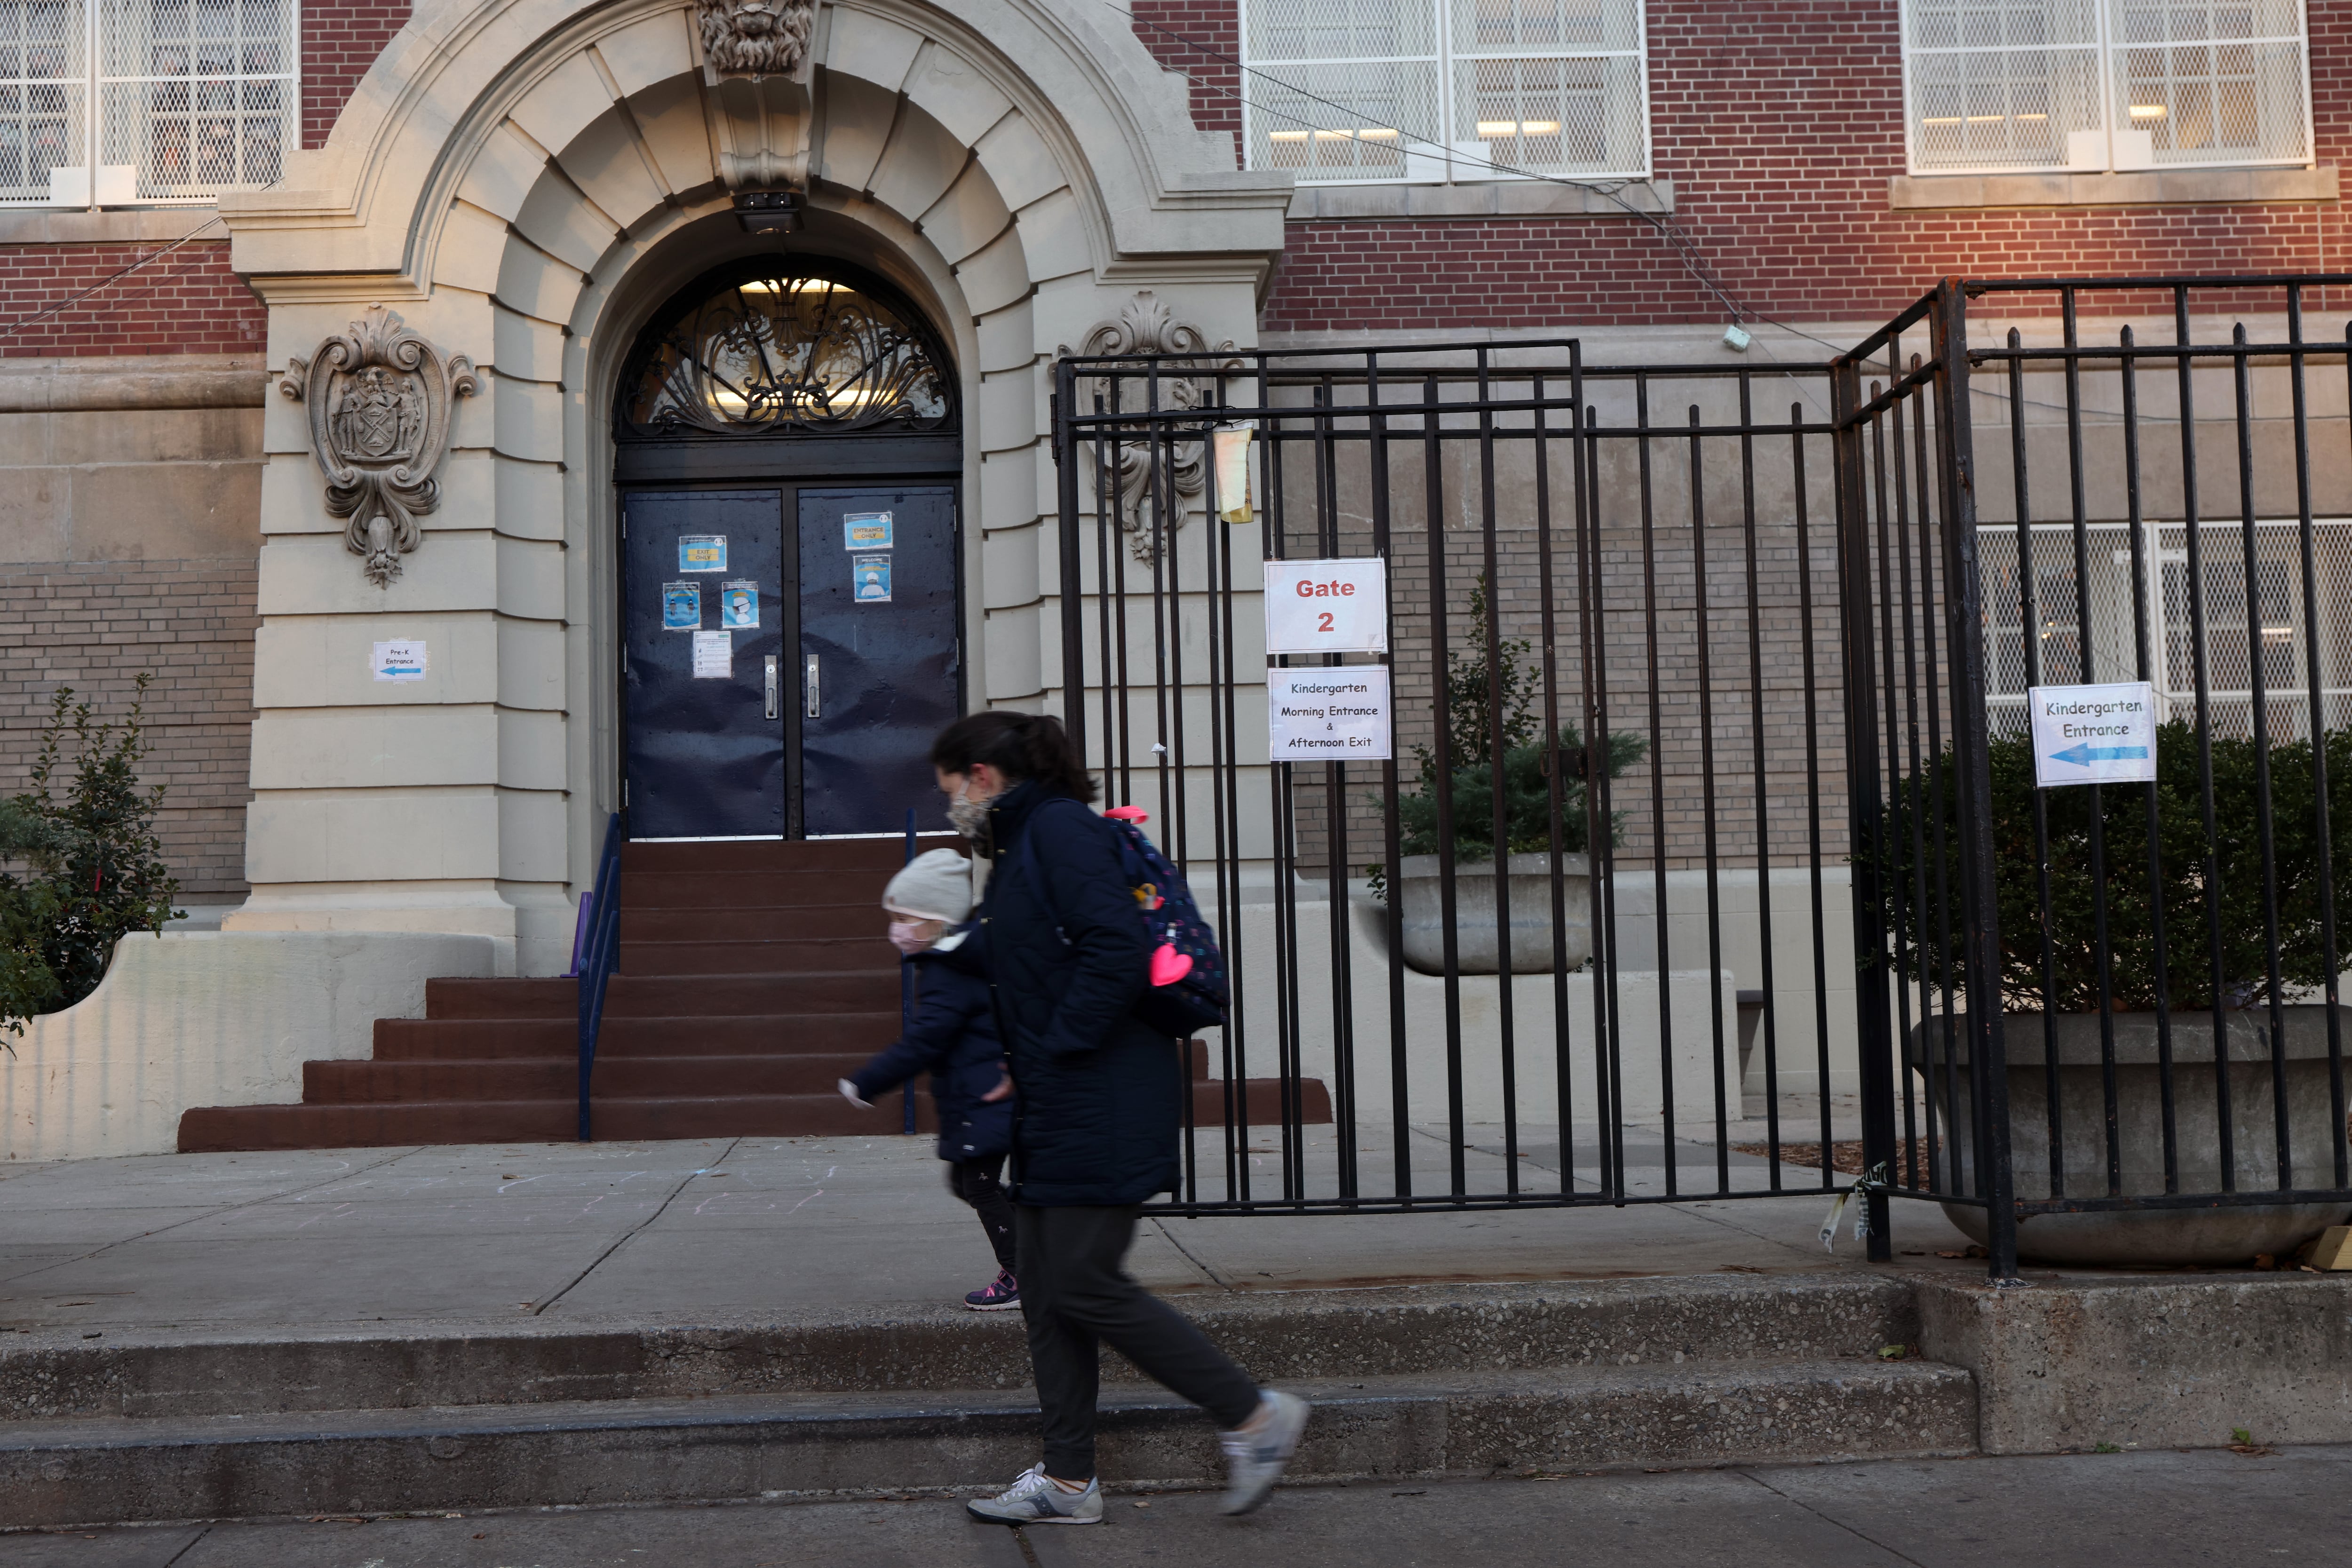 People walk by a public school in Brooklyn on Nov. 18, 2020. Public schools in New York City, the largest school district in the nation, will close again on Thursday, officials have said after the city reached a 3% Covid test positivity rate.